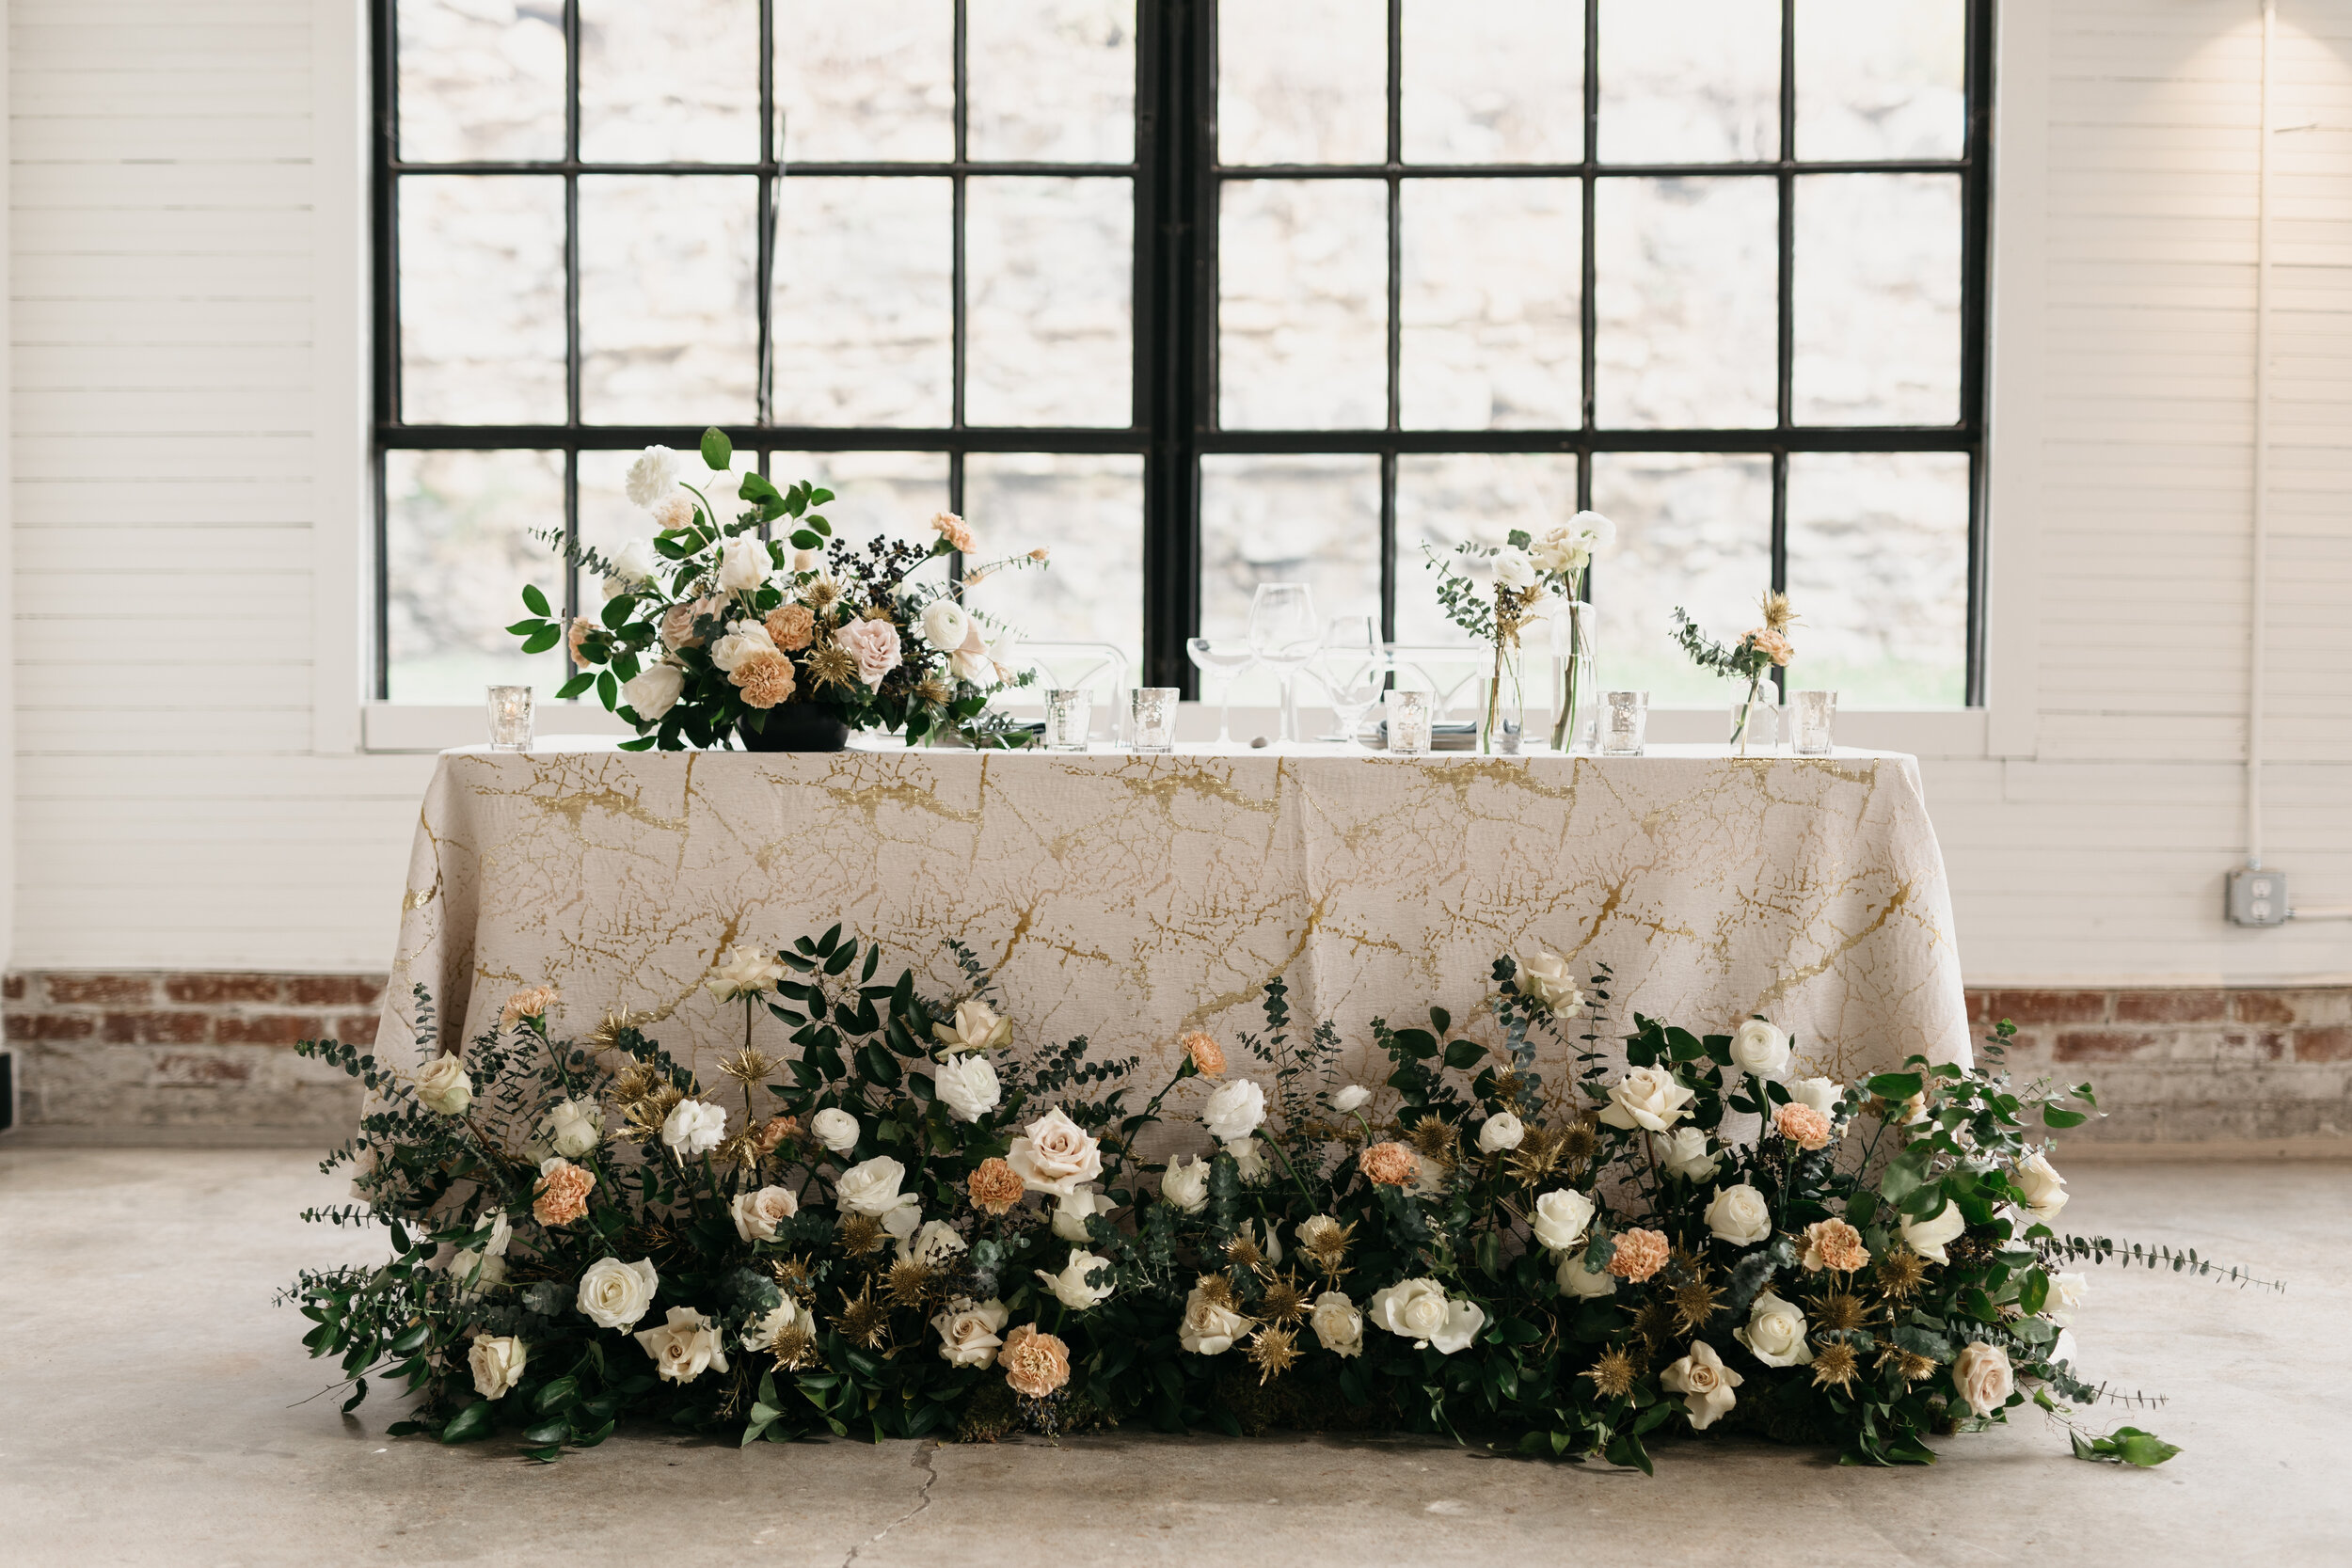 Wintery growing floor installation and tablescape featuring white roses, touches of gold, baby eucalyptus and lush greenery. Nashville wedding florist Rosemary & Finch at OZARI.